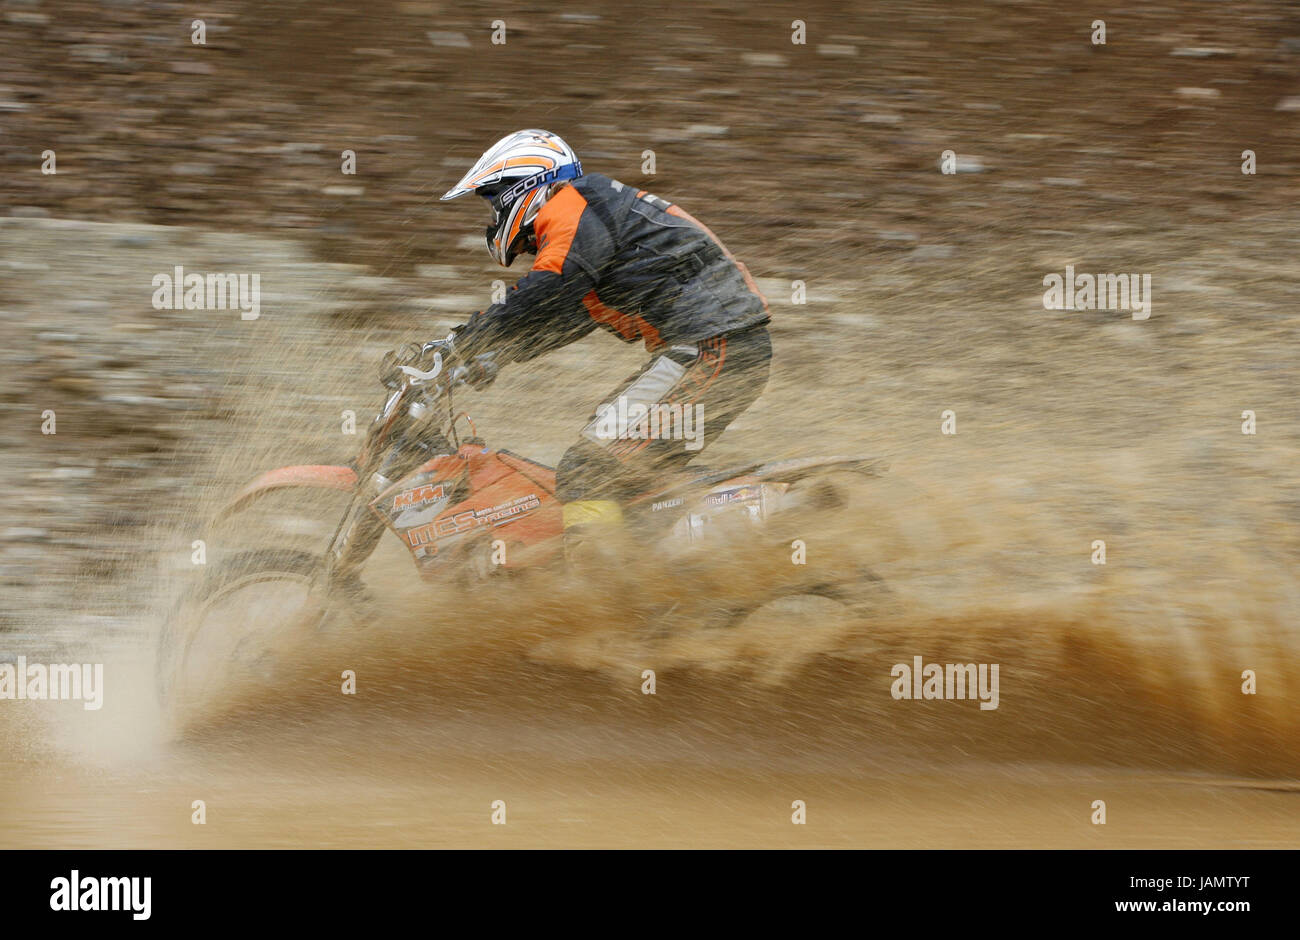 Moto crosses,motor sport,Austria,Styria,iron ore,motorcycle,driver,mud,inject,no model release,no property release,arch mountain rodeo,racing driver,moto cross driver,race,moto cross race,passage,race track,person,sport,sport,racing sport,speed,motion,drop,puddle, Stock Photo